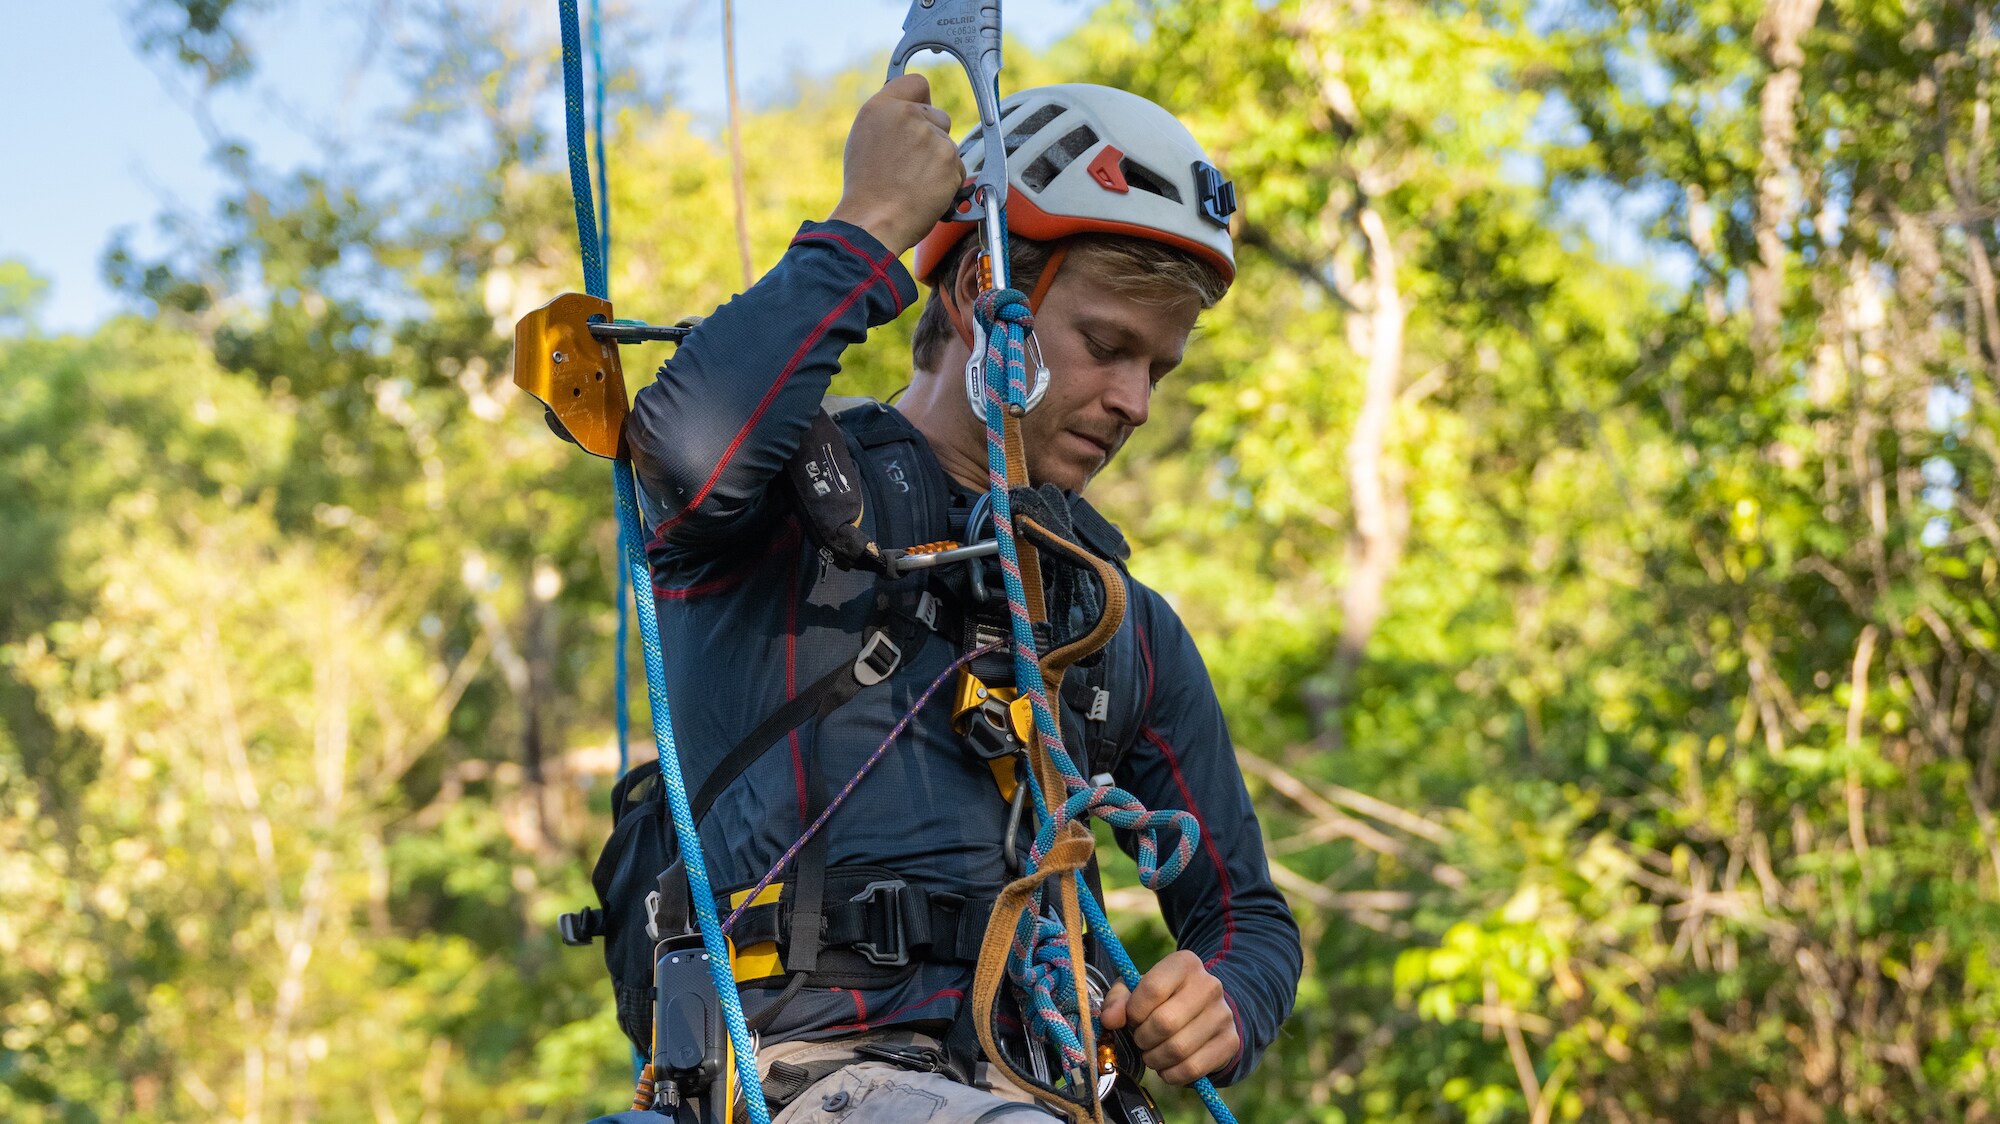 Bertie Gregory preparing to ascend into Kasanka's tallest tree. (Credit: National Geographic/Oliver Laker for Disney+)